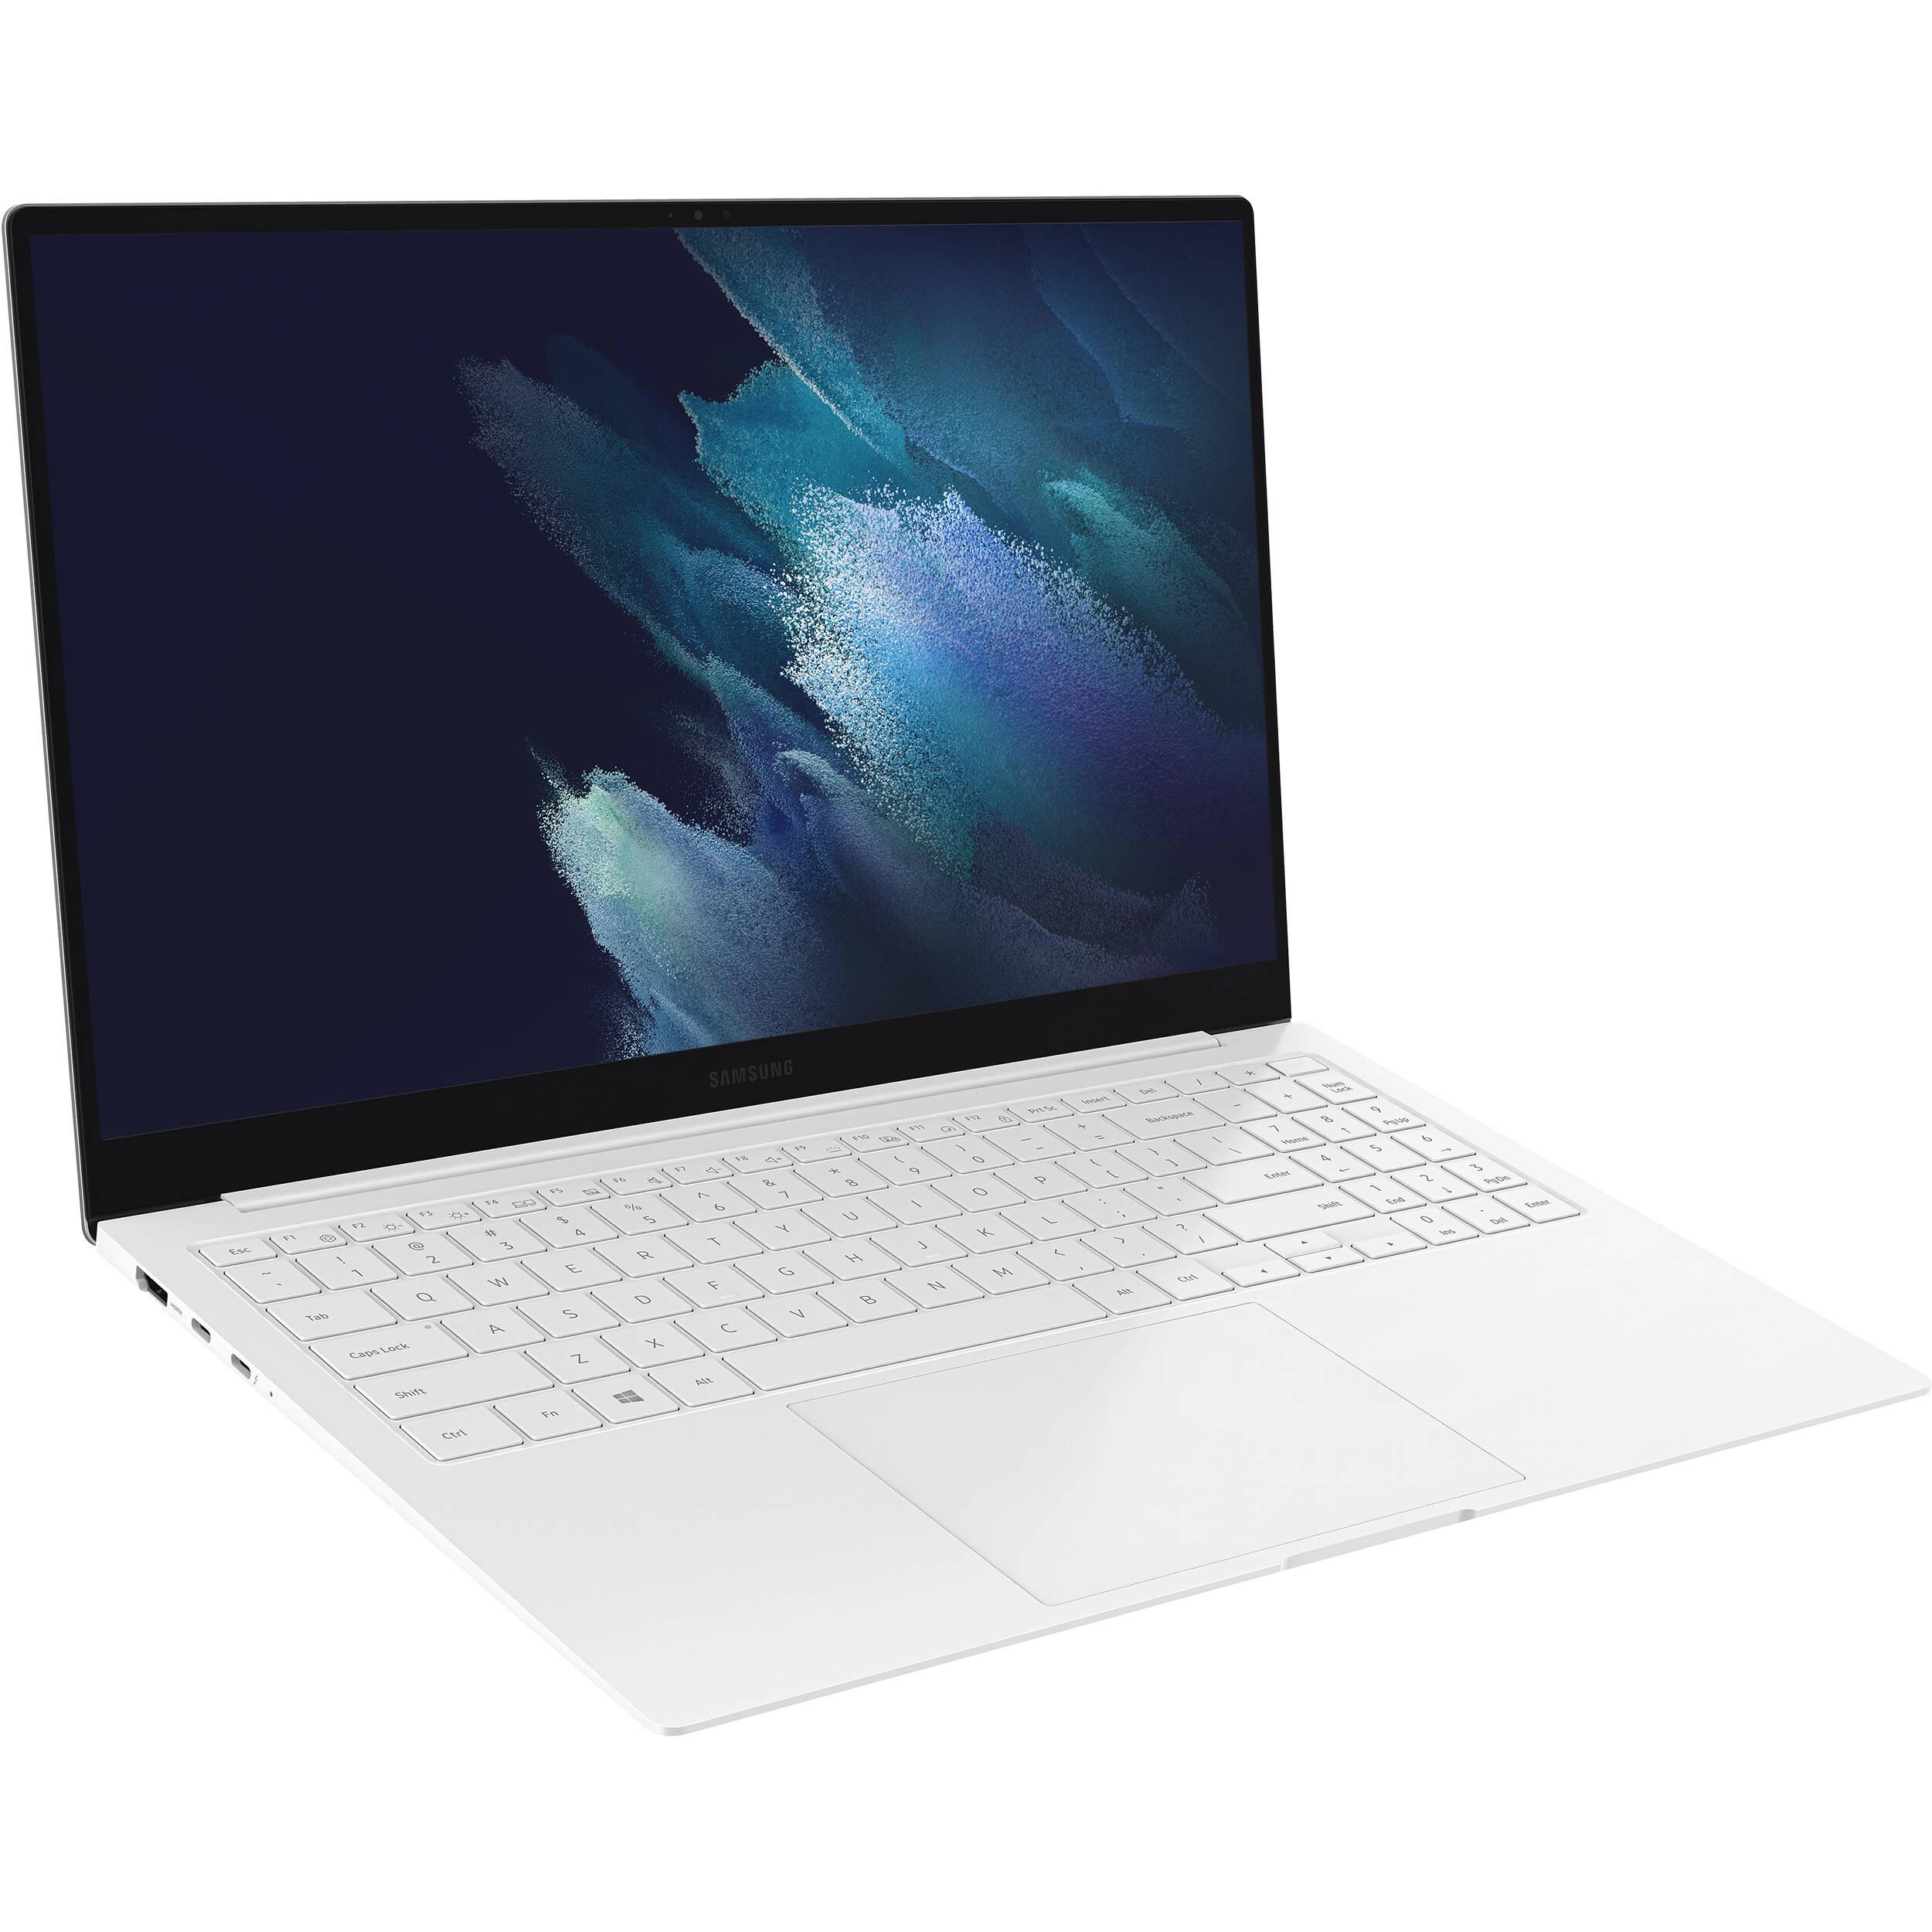 Samsung Galaxy Book Pro 15.6in Laptop with Galaxy Buds Pro for $664.99 Shipped